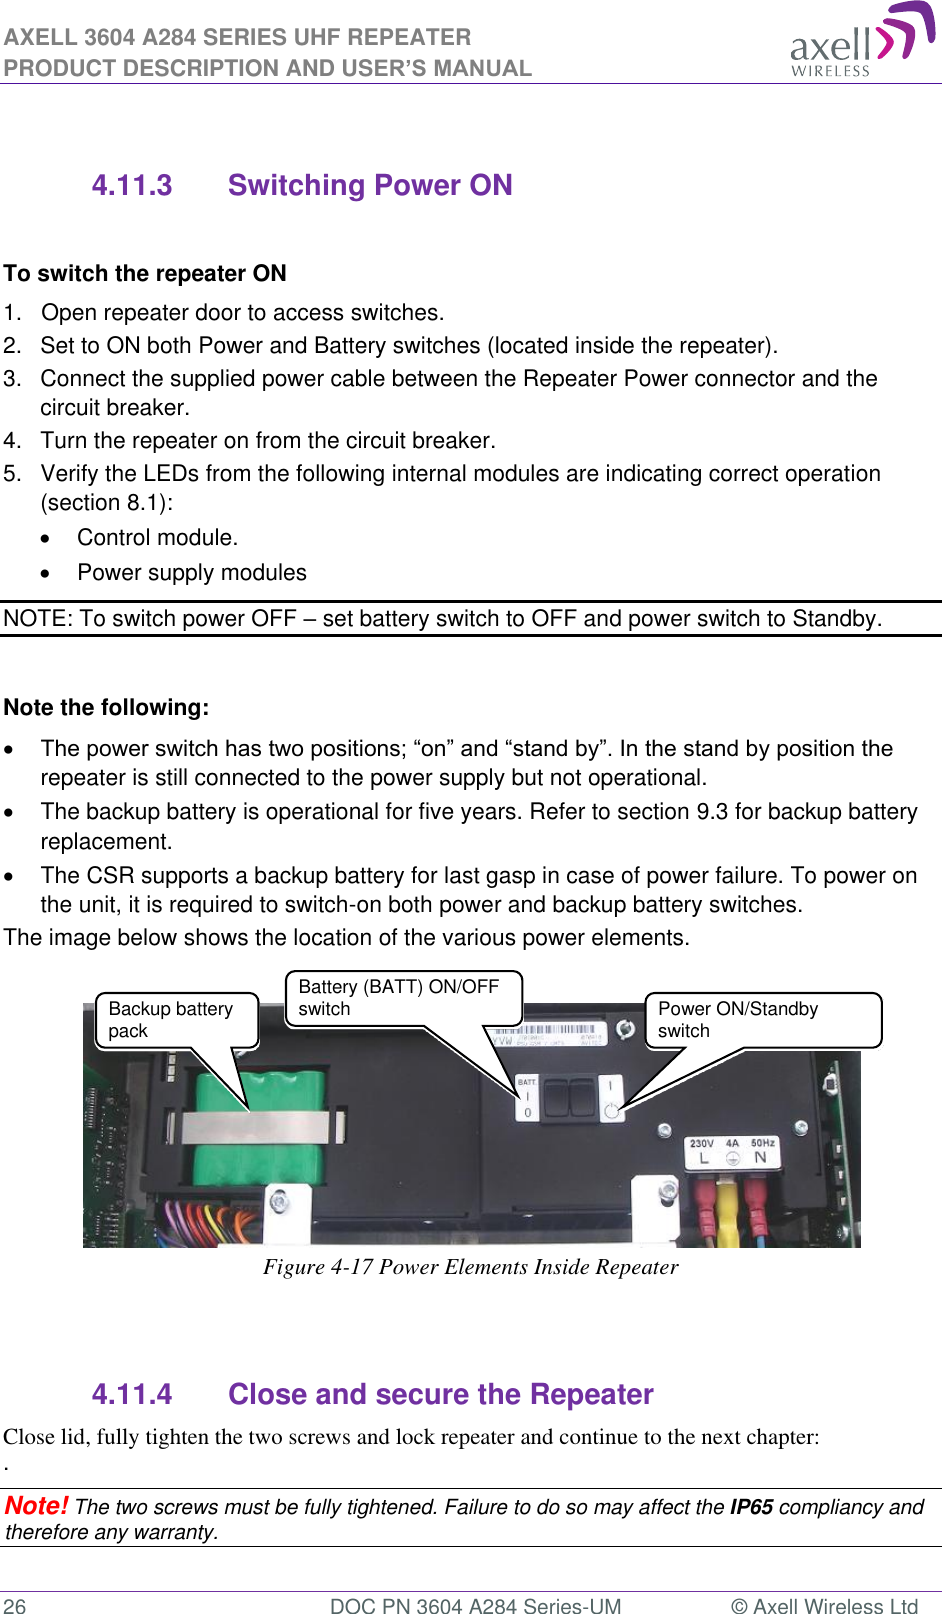 AXELL 3604 A284 SERIES UHF REPEATER PRODUCT DESCRIPTION AND USER’S MANUAL  26  DOC PN 3604 A284 Series-UM  © Axell Wireless Ltd   4.11.3  Switching Power ON  To switch the repeater ON 1.   Open repeater door to access switches. 2.   Set to ON both Power and Battery switches (located inside the repeater).  3.   Connect the supplied power cable between the Repeater Power connector and the circuit breaker.  4.  Turn the repeater on from the circuit breaker. 5.   Verify the LEDs from the following internal modules are indicating correct operation (section 8.1):   Control module.   Power supply modules NOTE: To switch power OFF  set battery switch to OFF and power switch to Standby.  Note the following:  repeater is still connected to the power supply but not operational.   The backup battery is operational for five years. Refer to section 9.3 for backup battery replacement.  The CSR supports a backup battery for last gasp in case of power failure. To power on the unit, it is required to switch-on both power and backup battery switches. The image below shows the location of the various power elements.     Figure 4-17 Power Elements Inside Repeater   4.11.4  Close and secure the Repeater Close lid, fully tighten the two screws and lock repeater and continue to the next chapter:  . Note! The two screws must be fully tightened. Failure to do so may affect the IP65 compliancy and therefore any warranty.  Power ON/Standby switch Backup battery pack  Battery (BATT) ON/OFF switch 